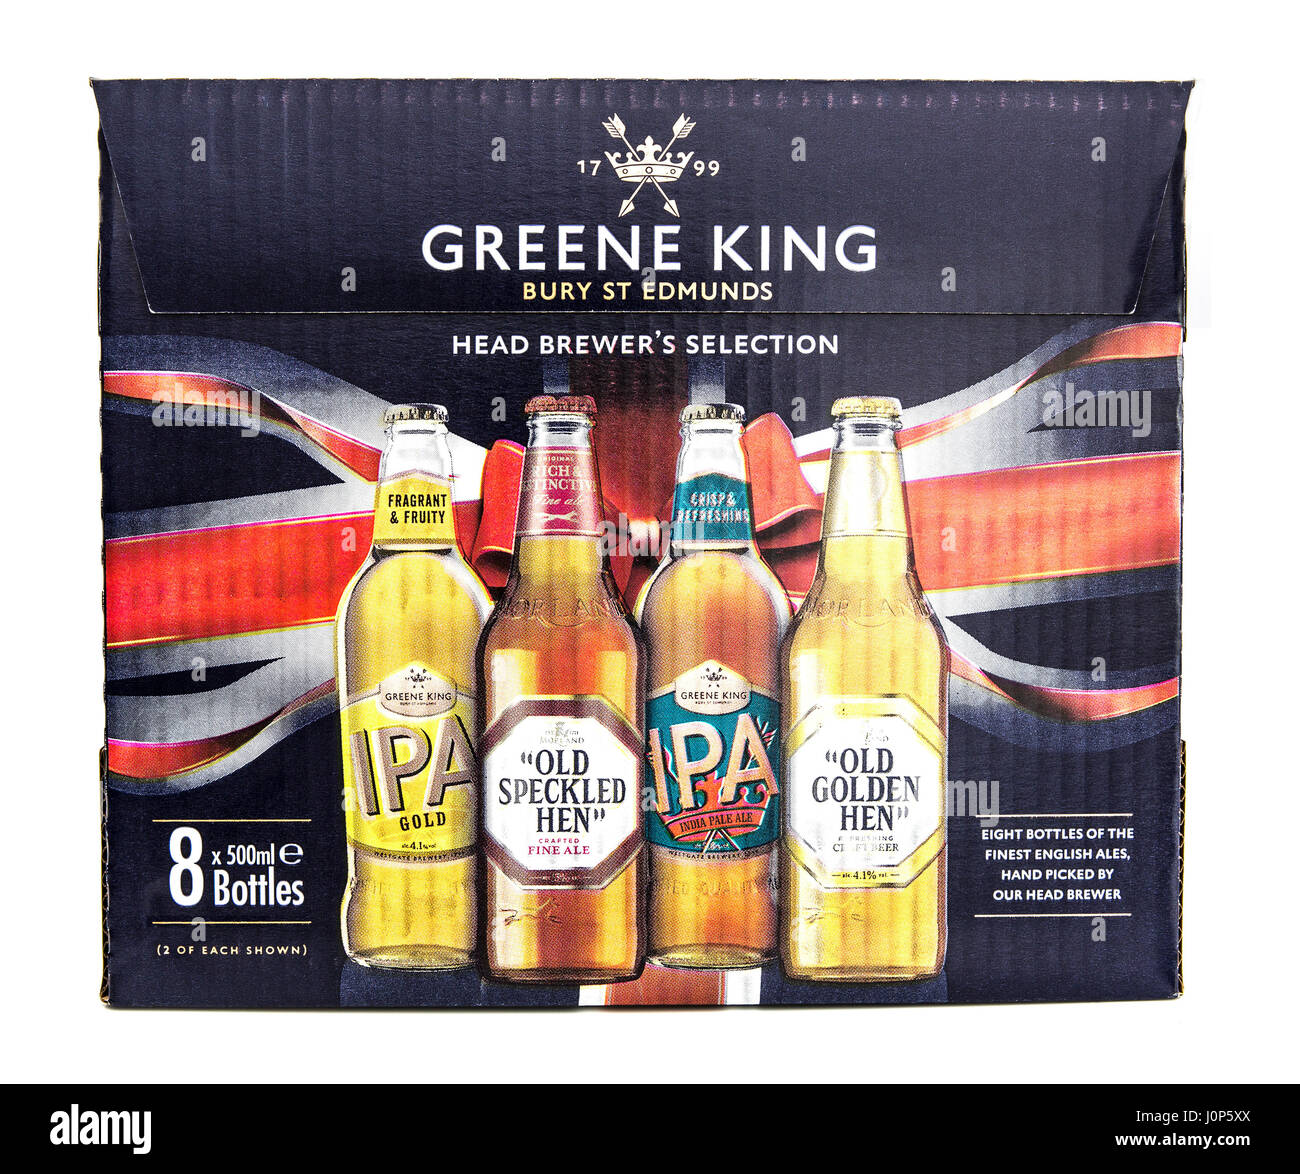 SWINDON, UK - APRIL 06, 2017: Box of Head Brewers Selection Beers from Greene King, the box contains eight bottles of the finest English beers hand-pi Stock Photo